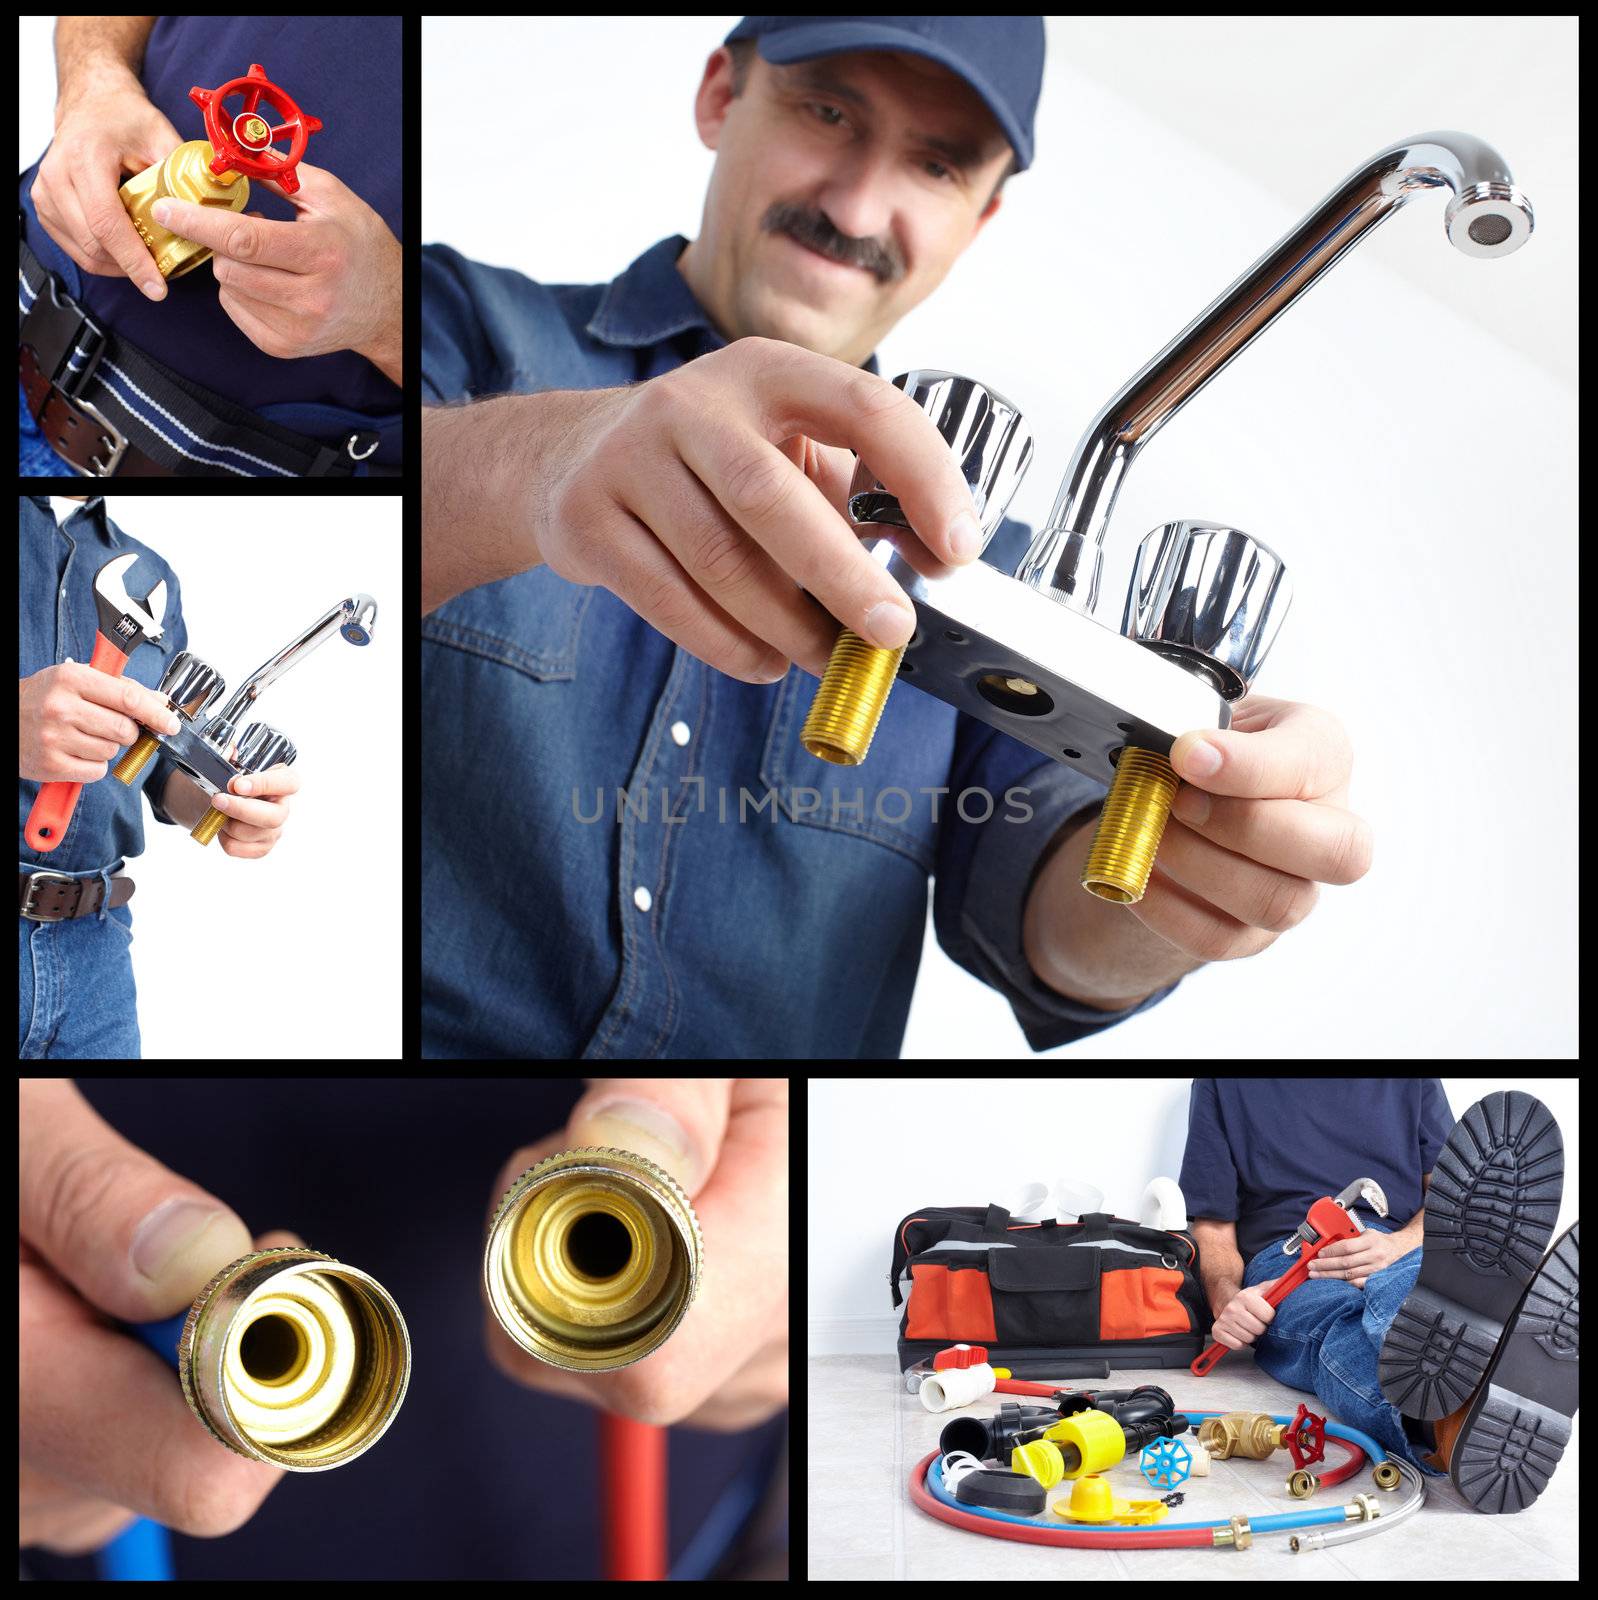 Plumber with tools and details. Worker people